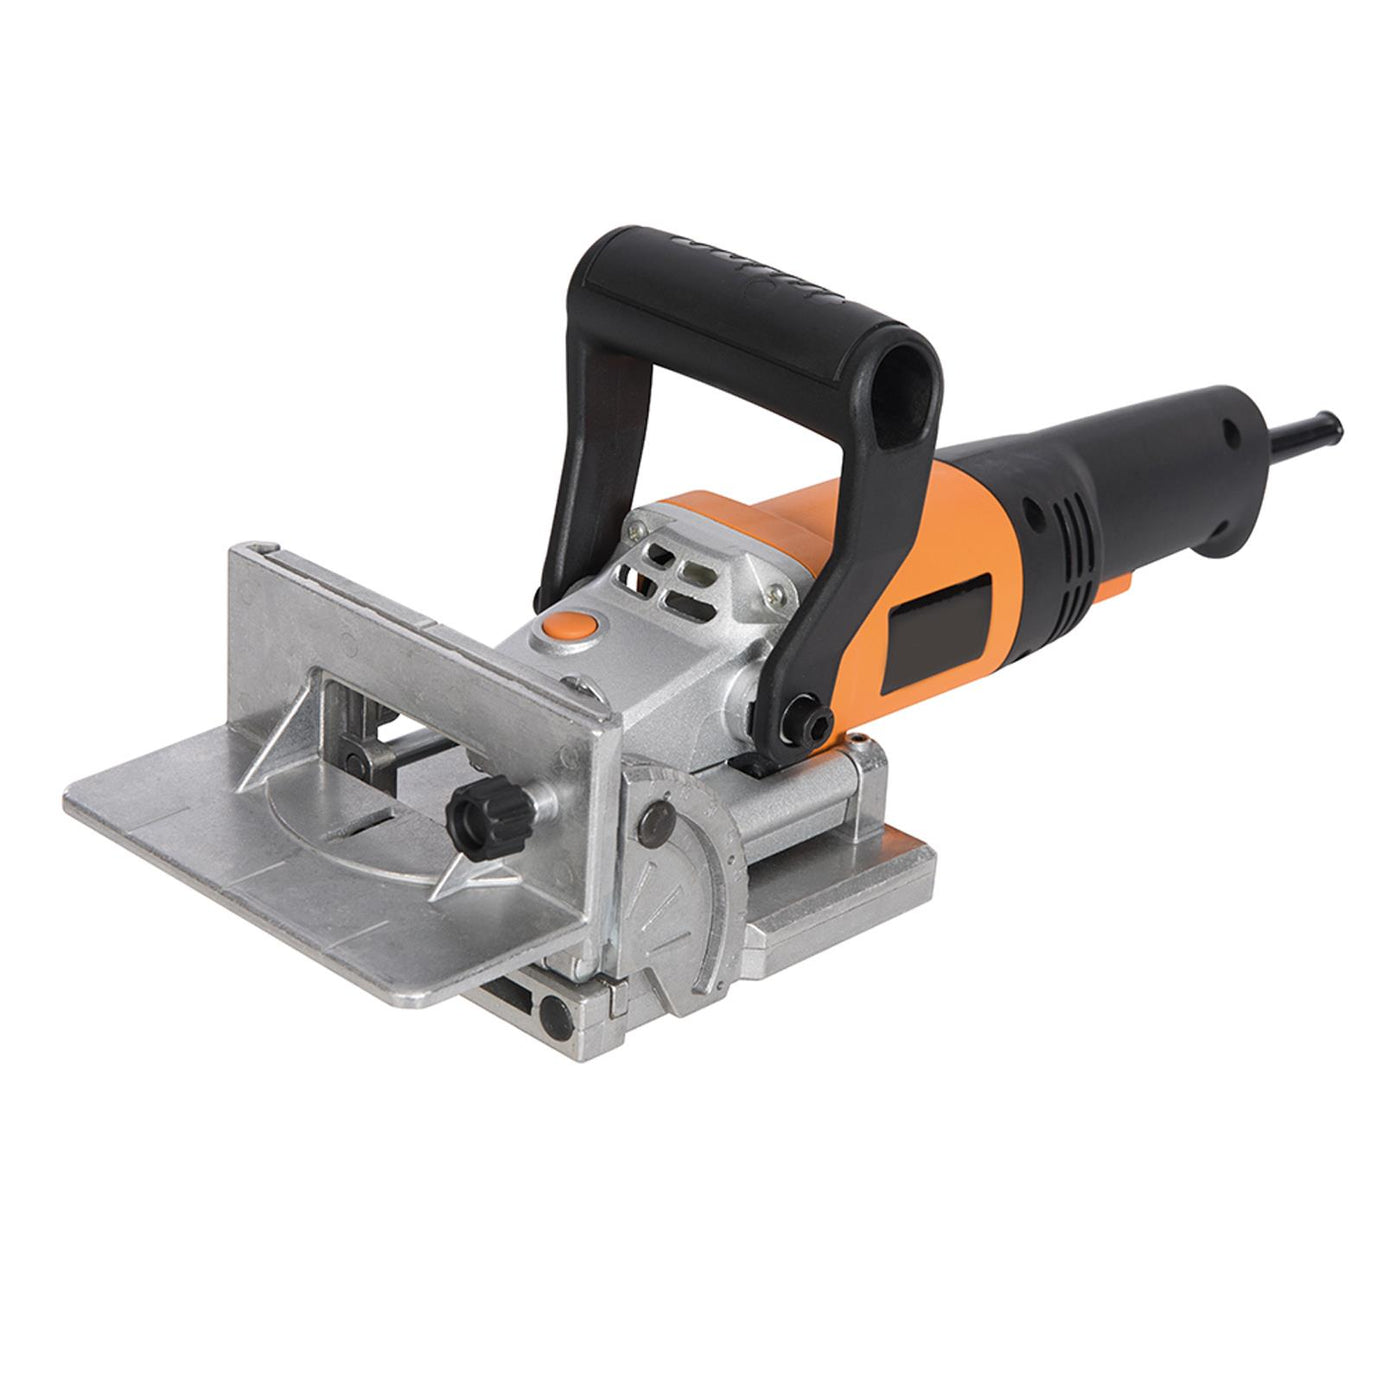 Biscuit Jointer 760W TBJ001 Jointers Dowel Jointers All-Metal Gearing